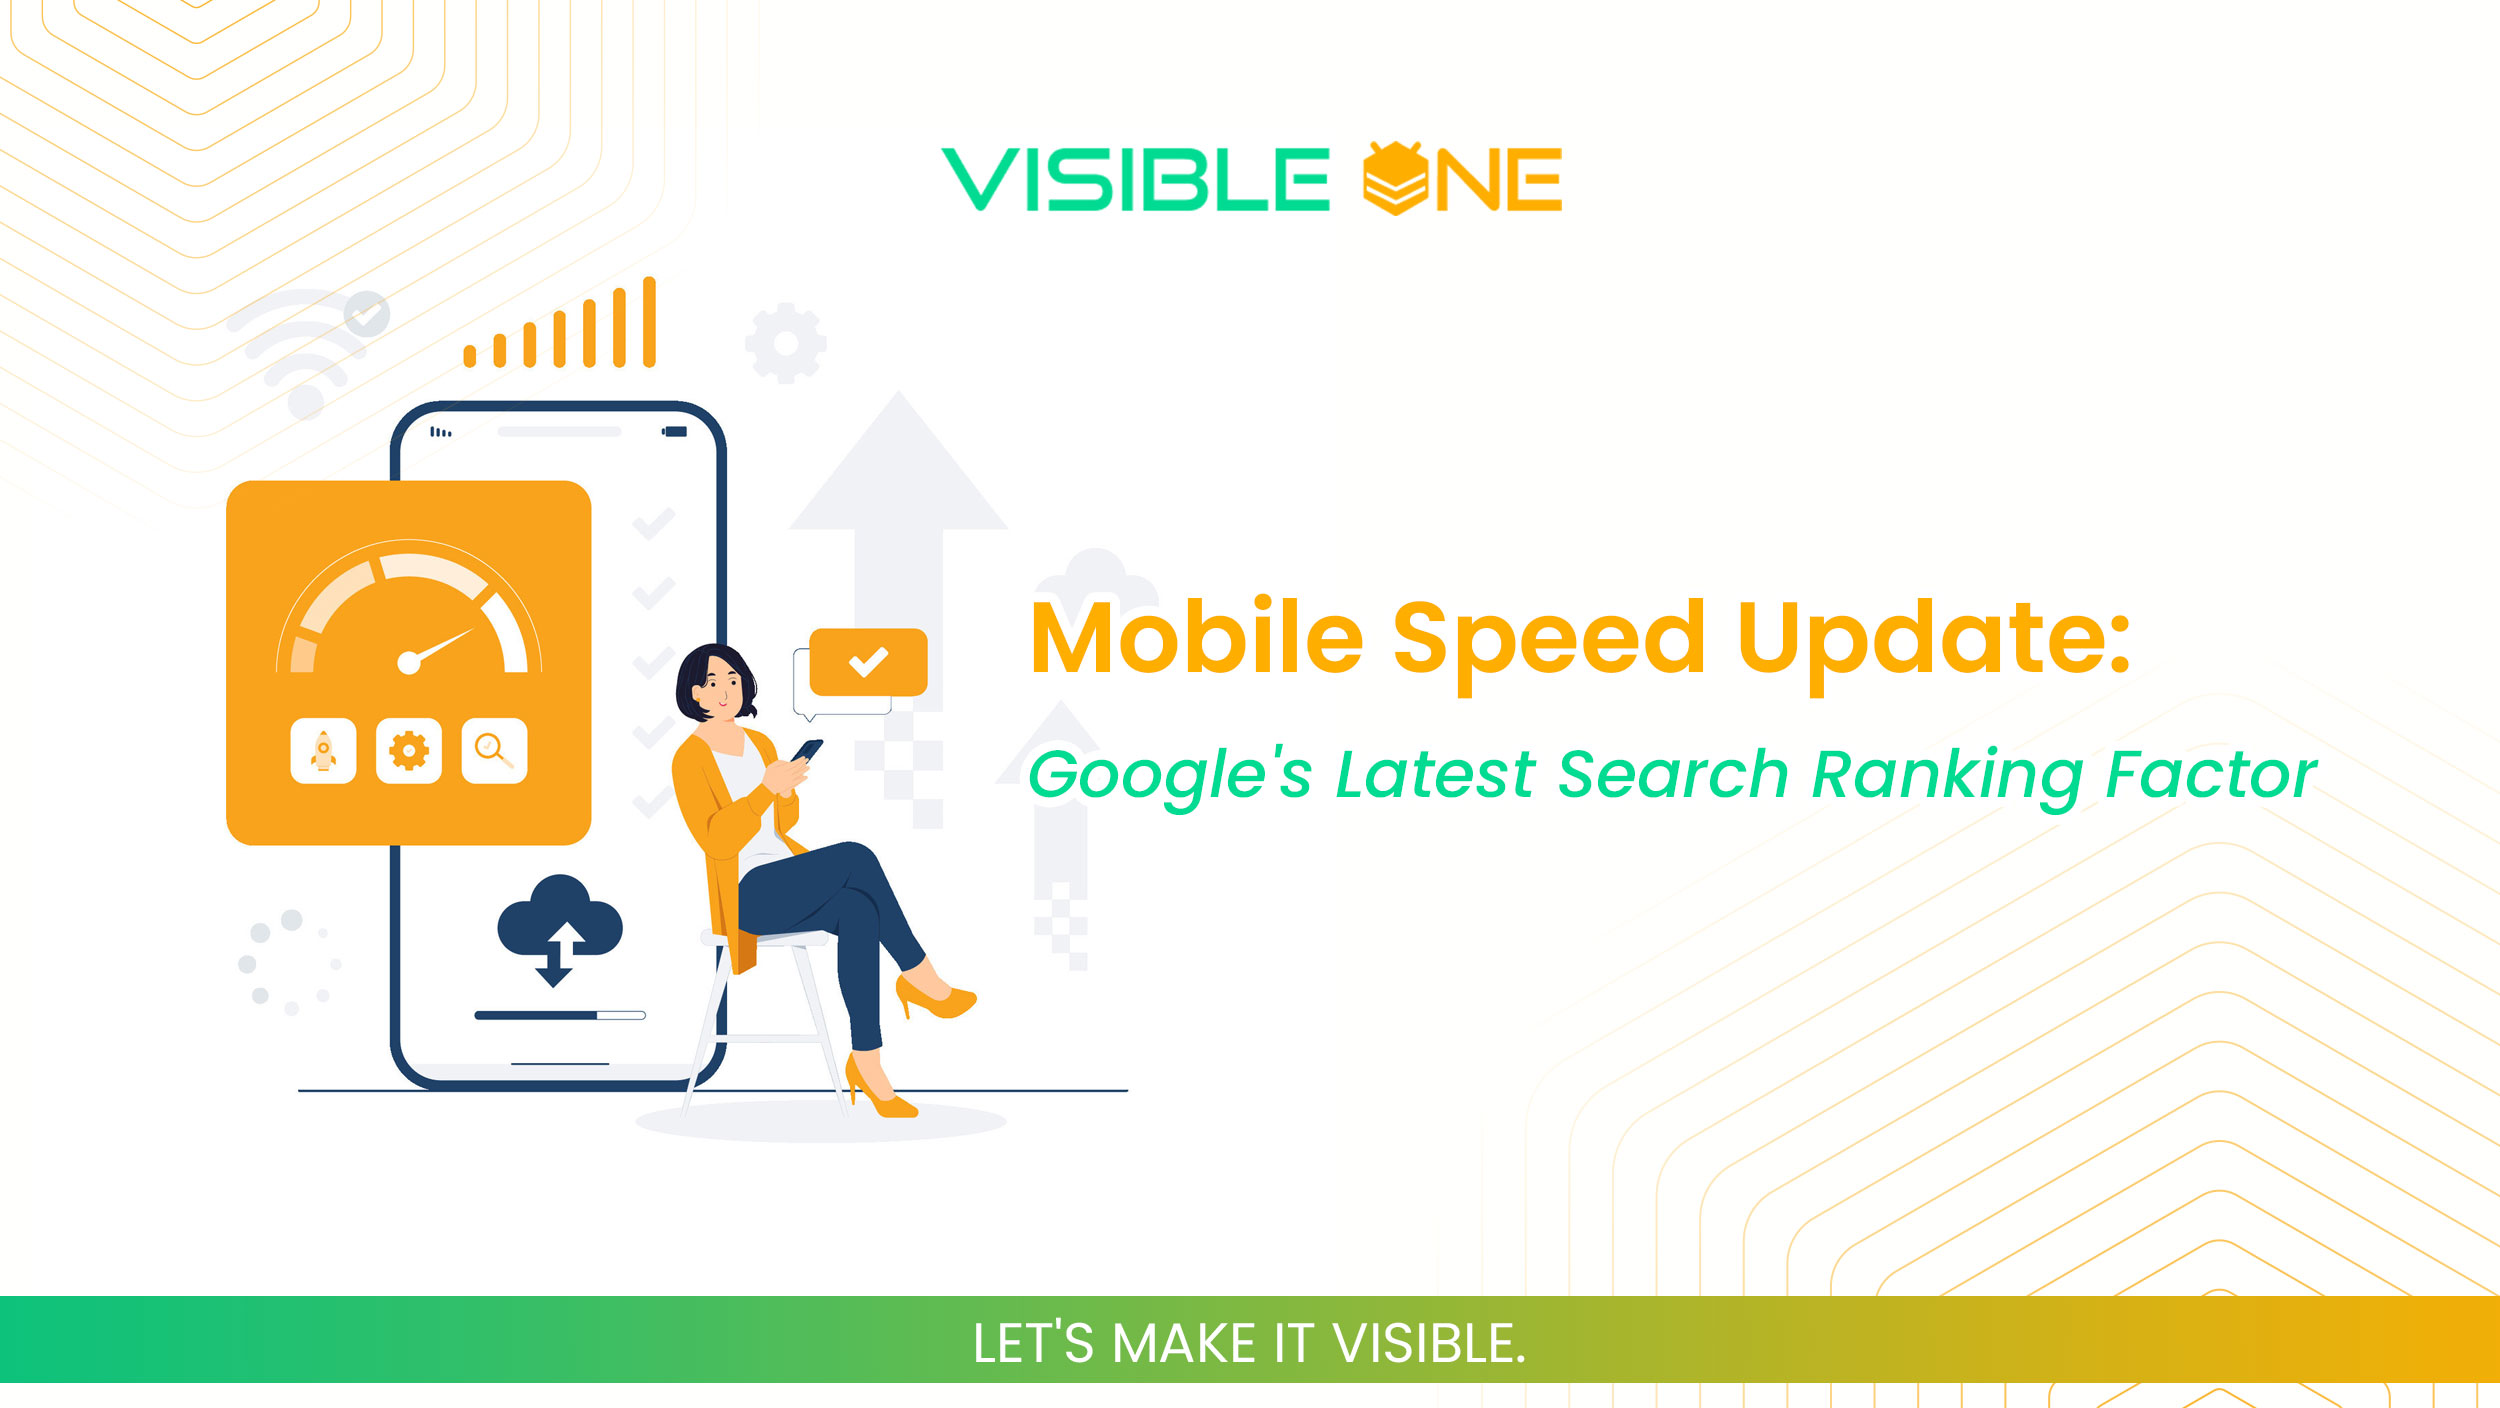 mobile speed update, yellow and green background, visible one